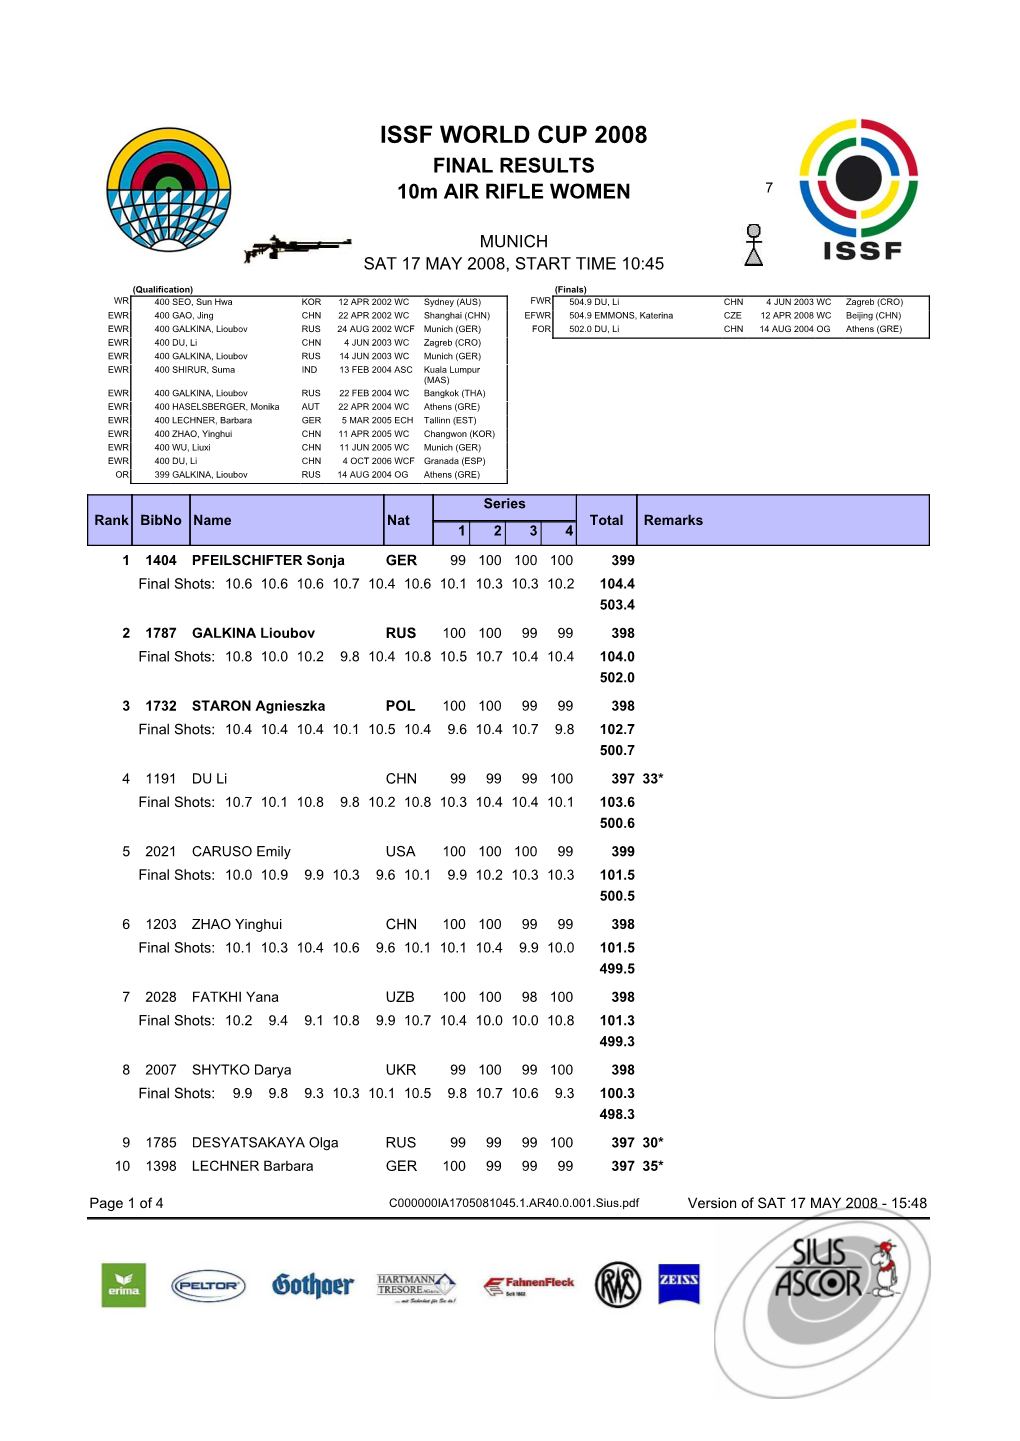 ISSF WORLD CUP 2008 FINAL RESULTS 10M AIR RIFLE WOMEN 7